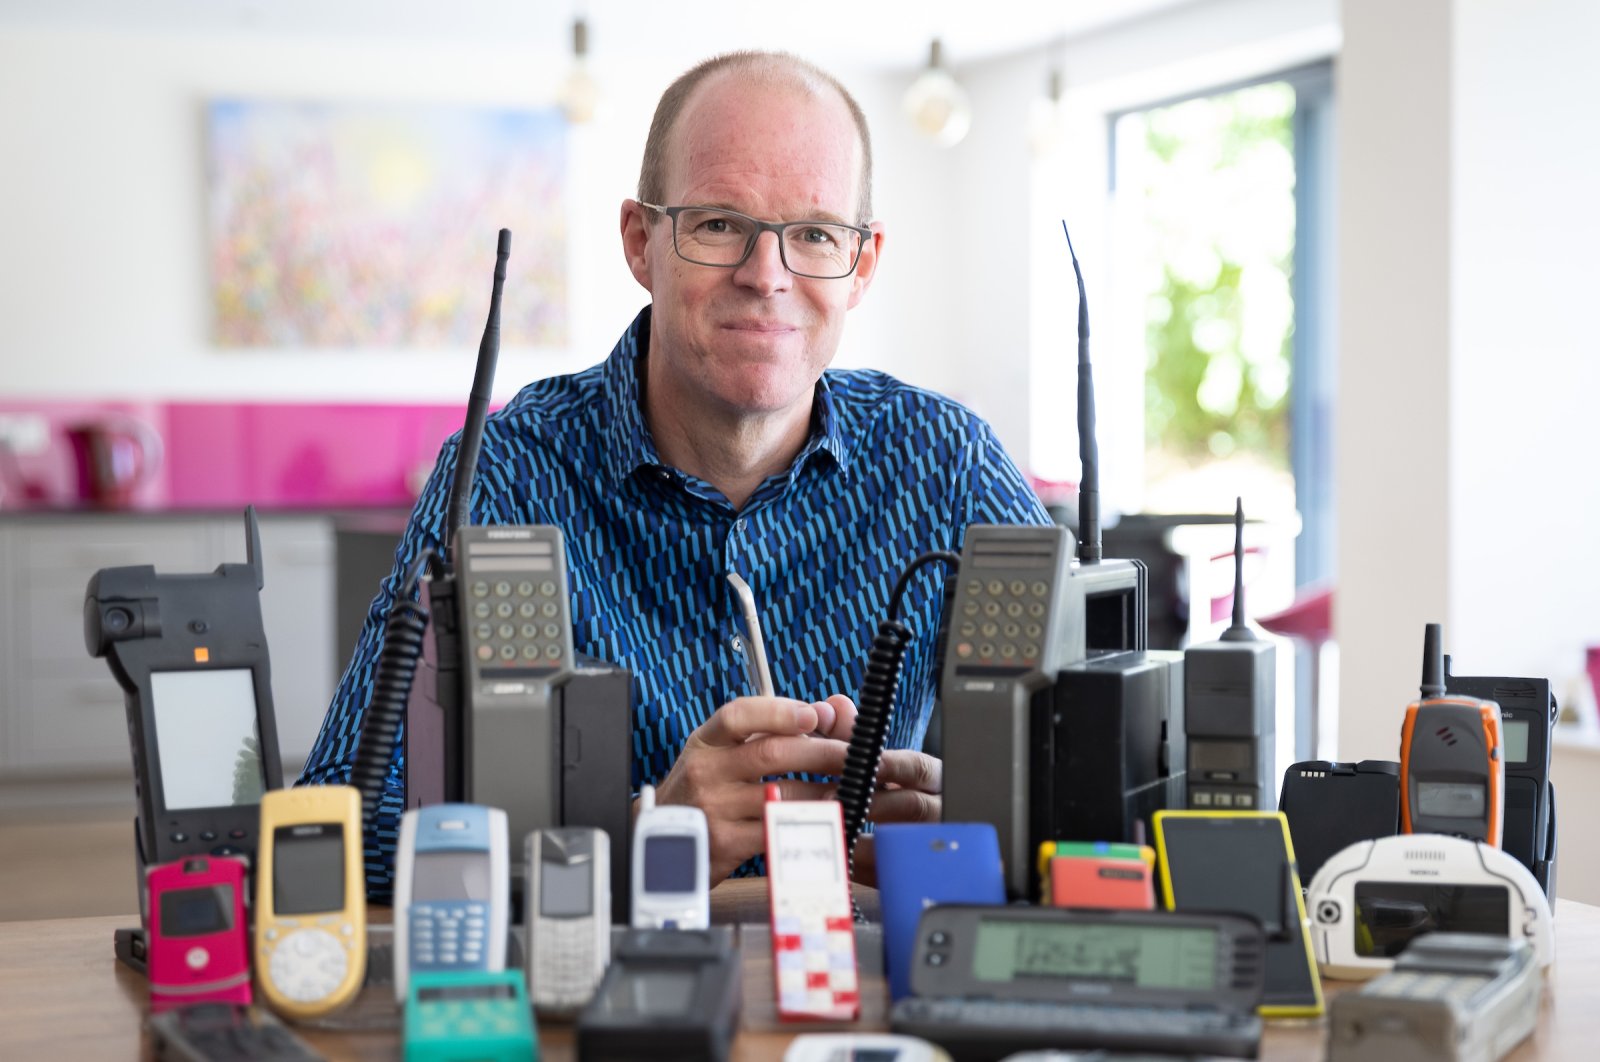 Ben Wood, founder of the Mobile Phone Museum, with some of the over 2,000 unique mobile phones that will be part of the online museum that launched in November. (DPA)